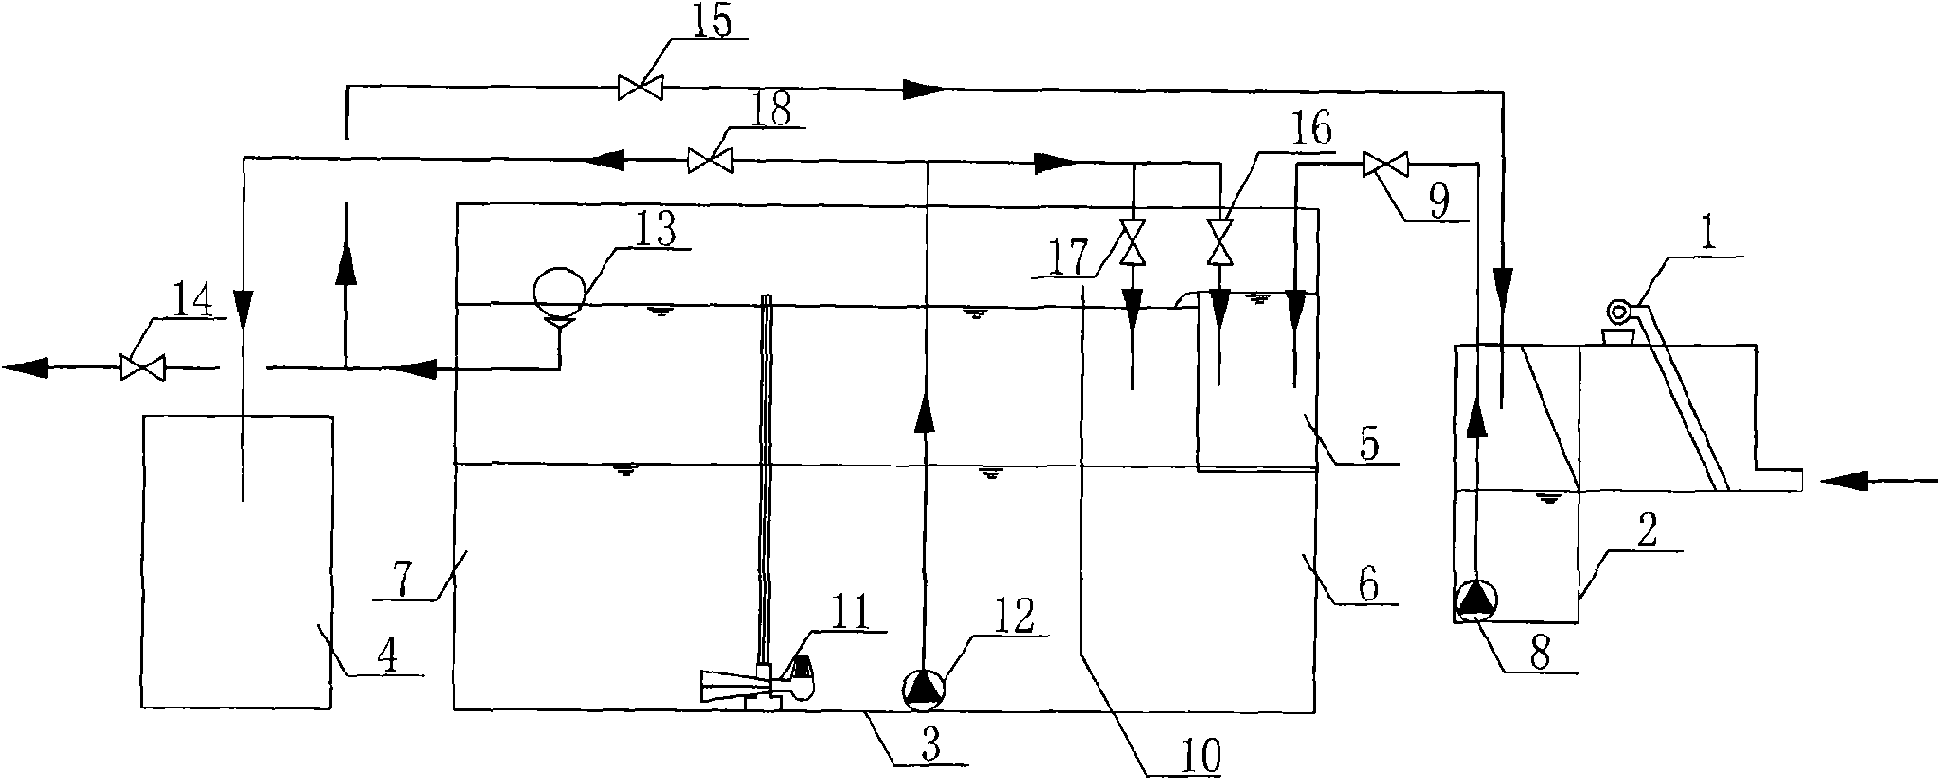 Integrated domestic sewage treatment device